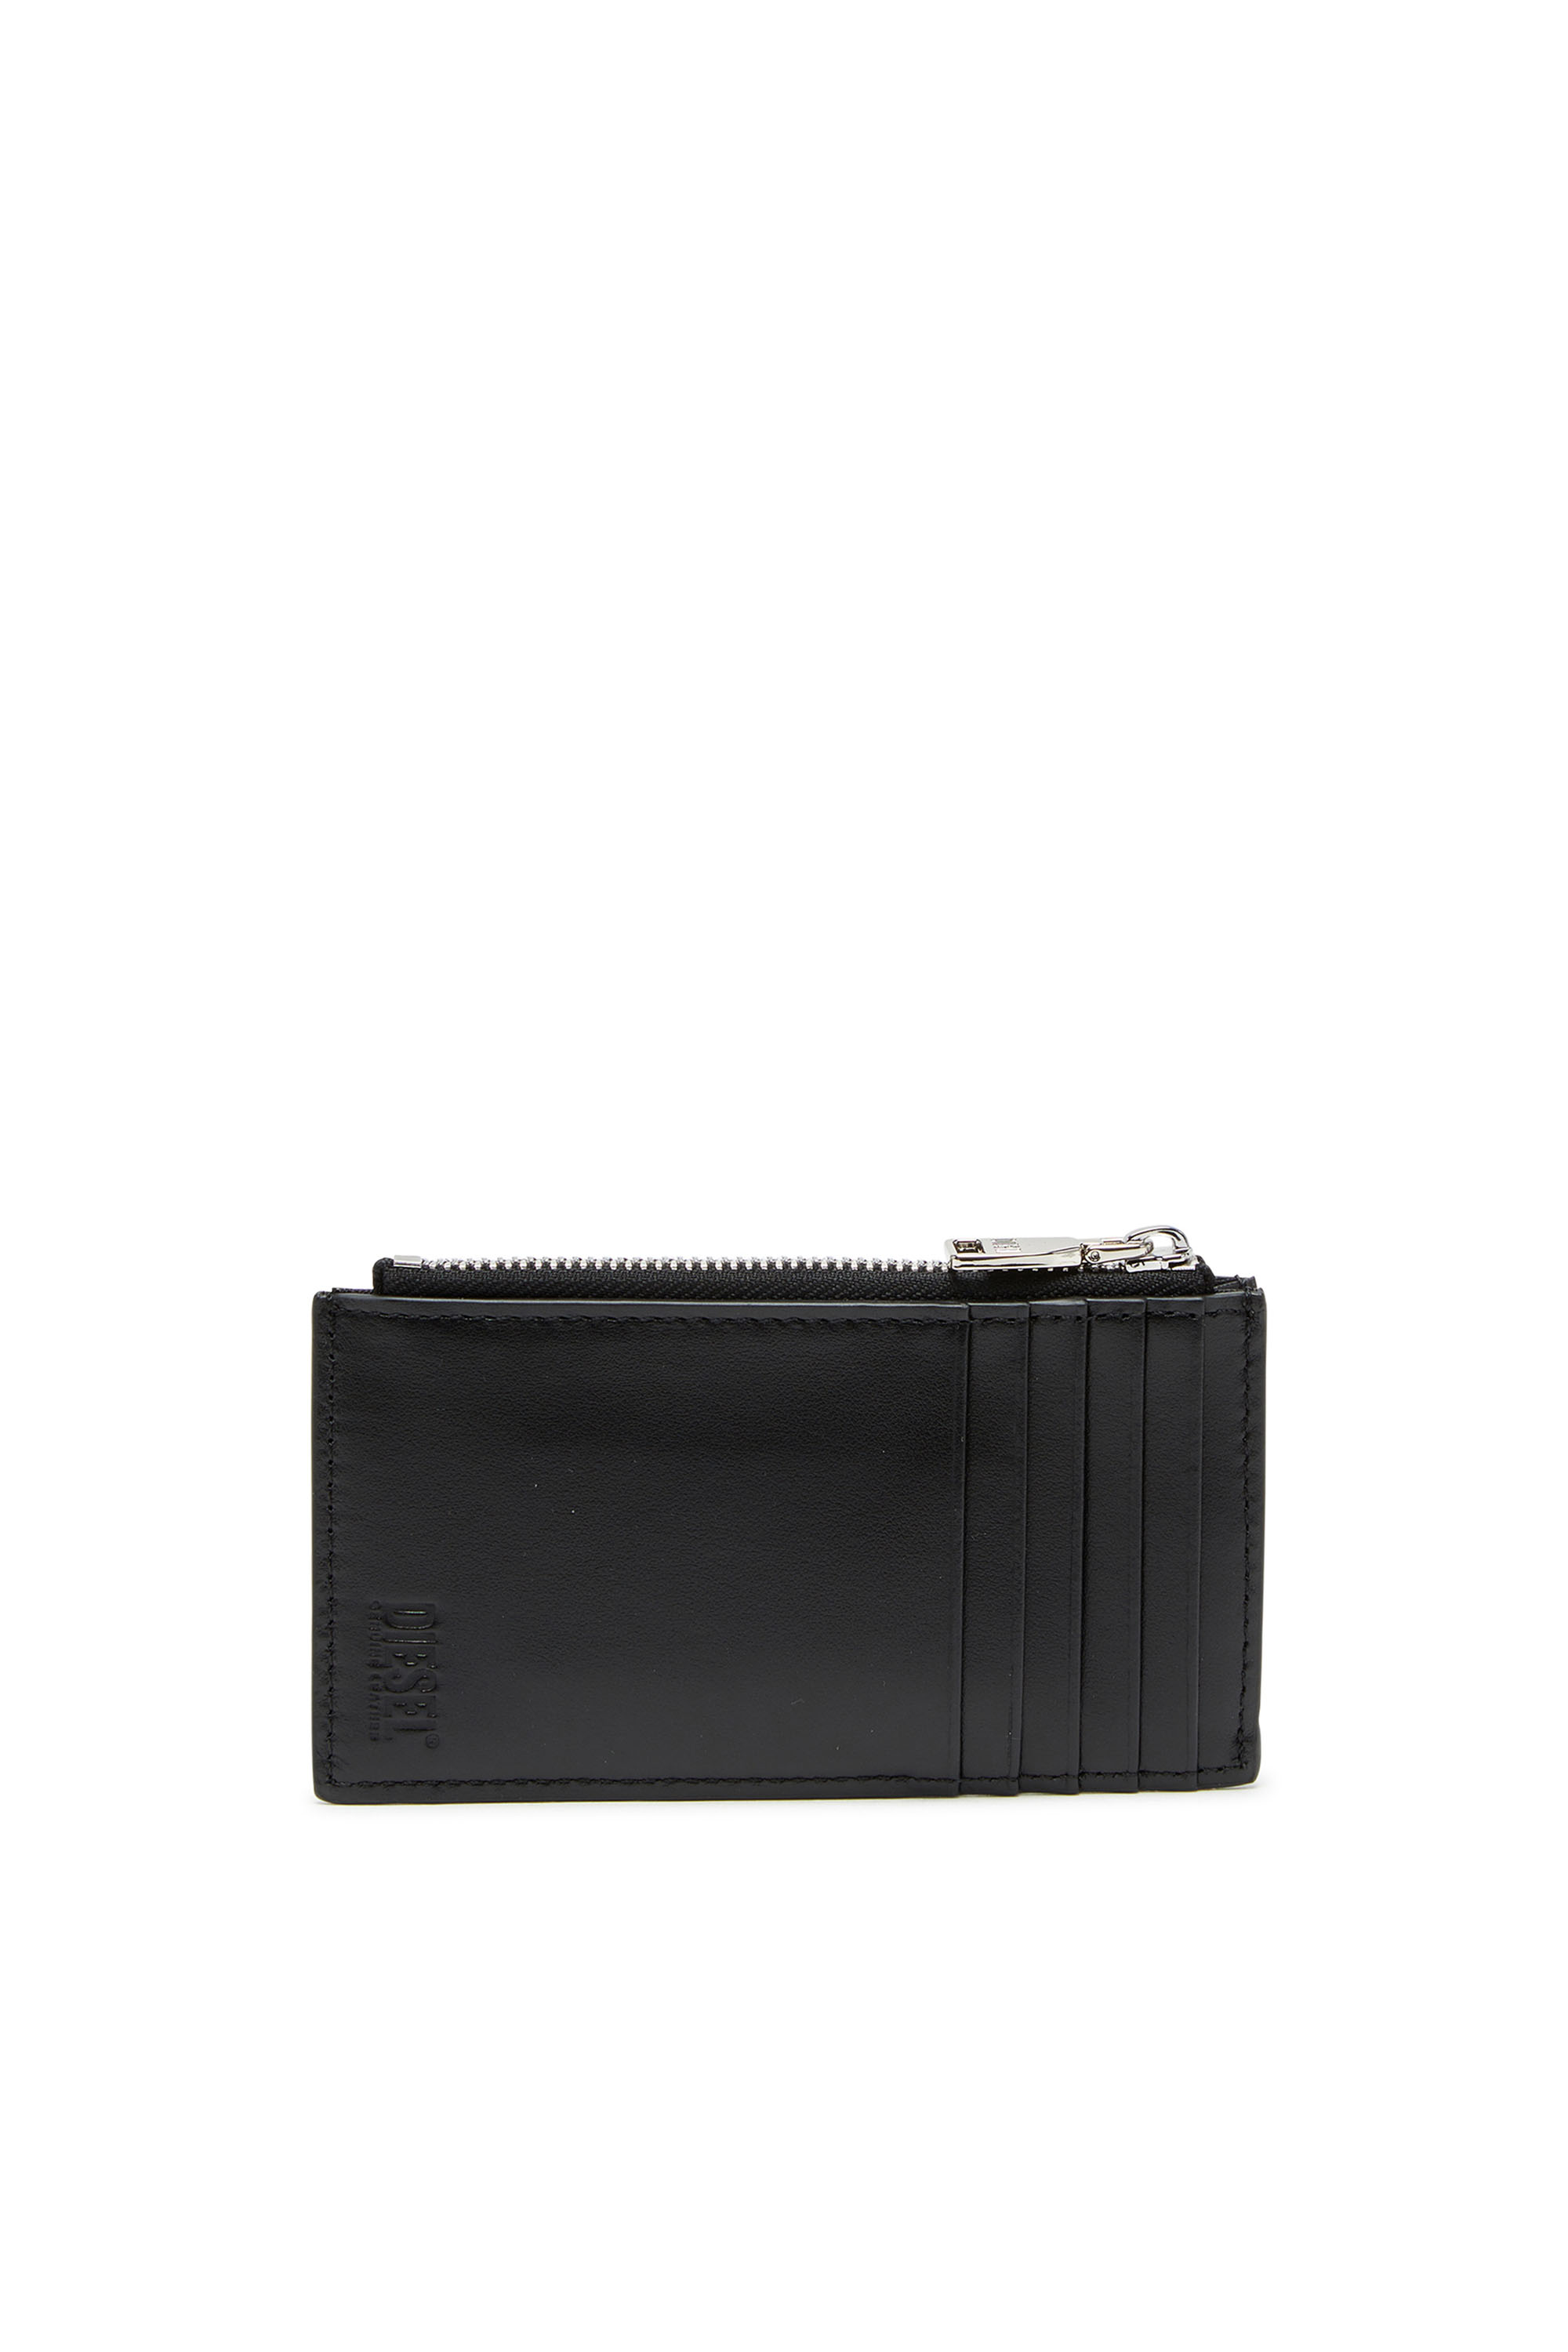 Diesel - PLAY CARD HOLDER III, Female Card holder in glossy leather in ブラック - Image 2